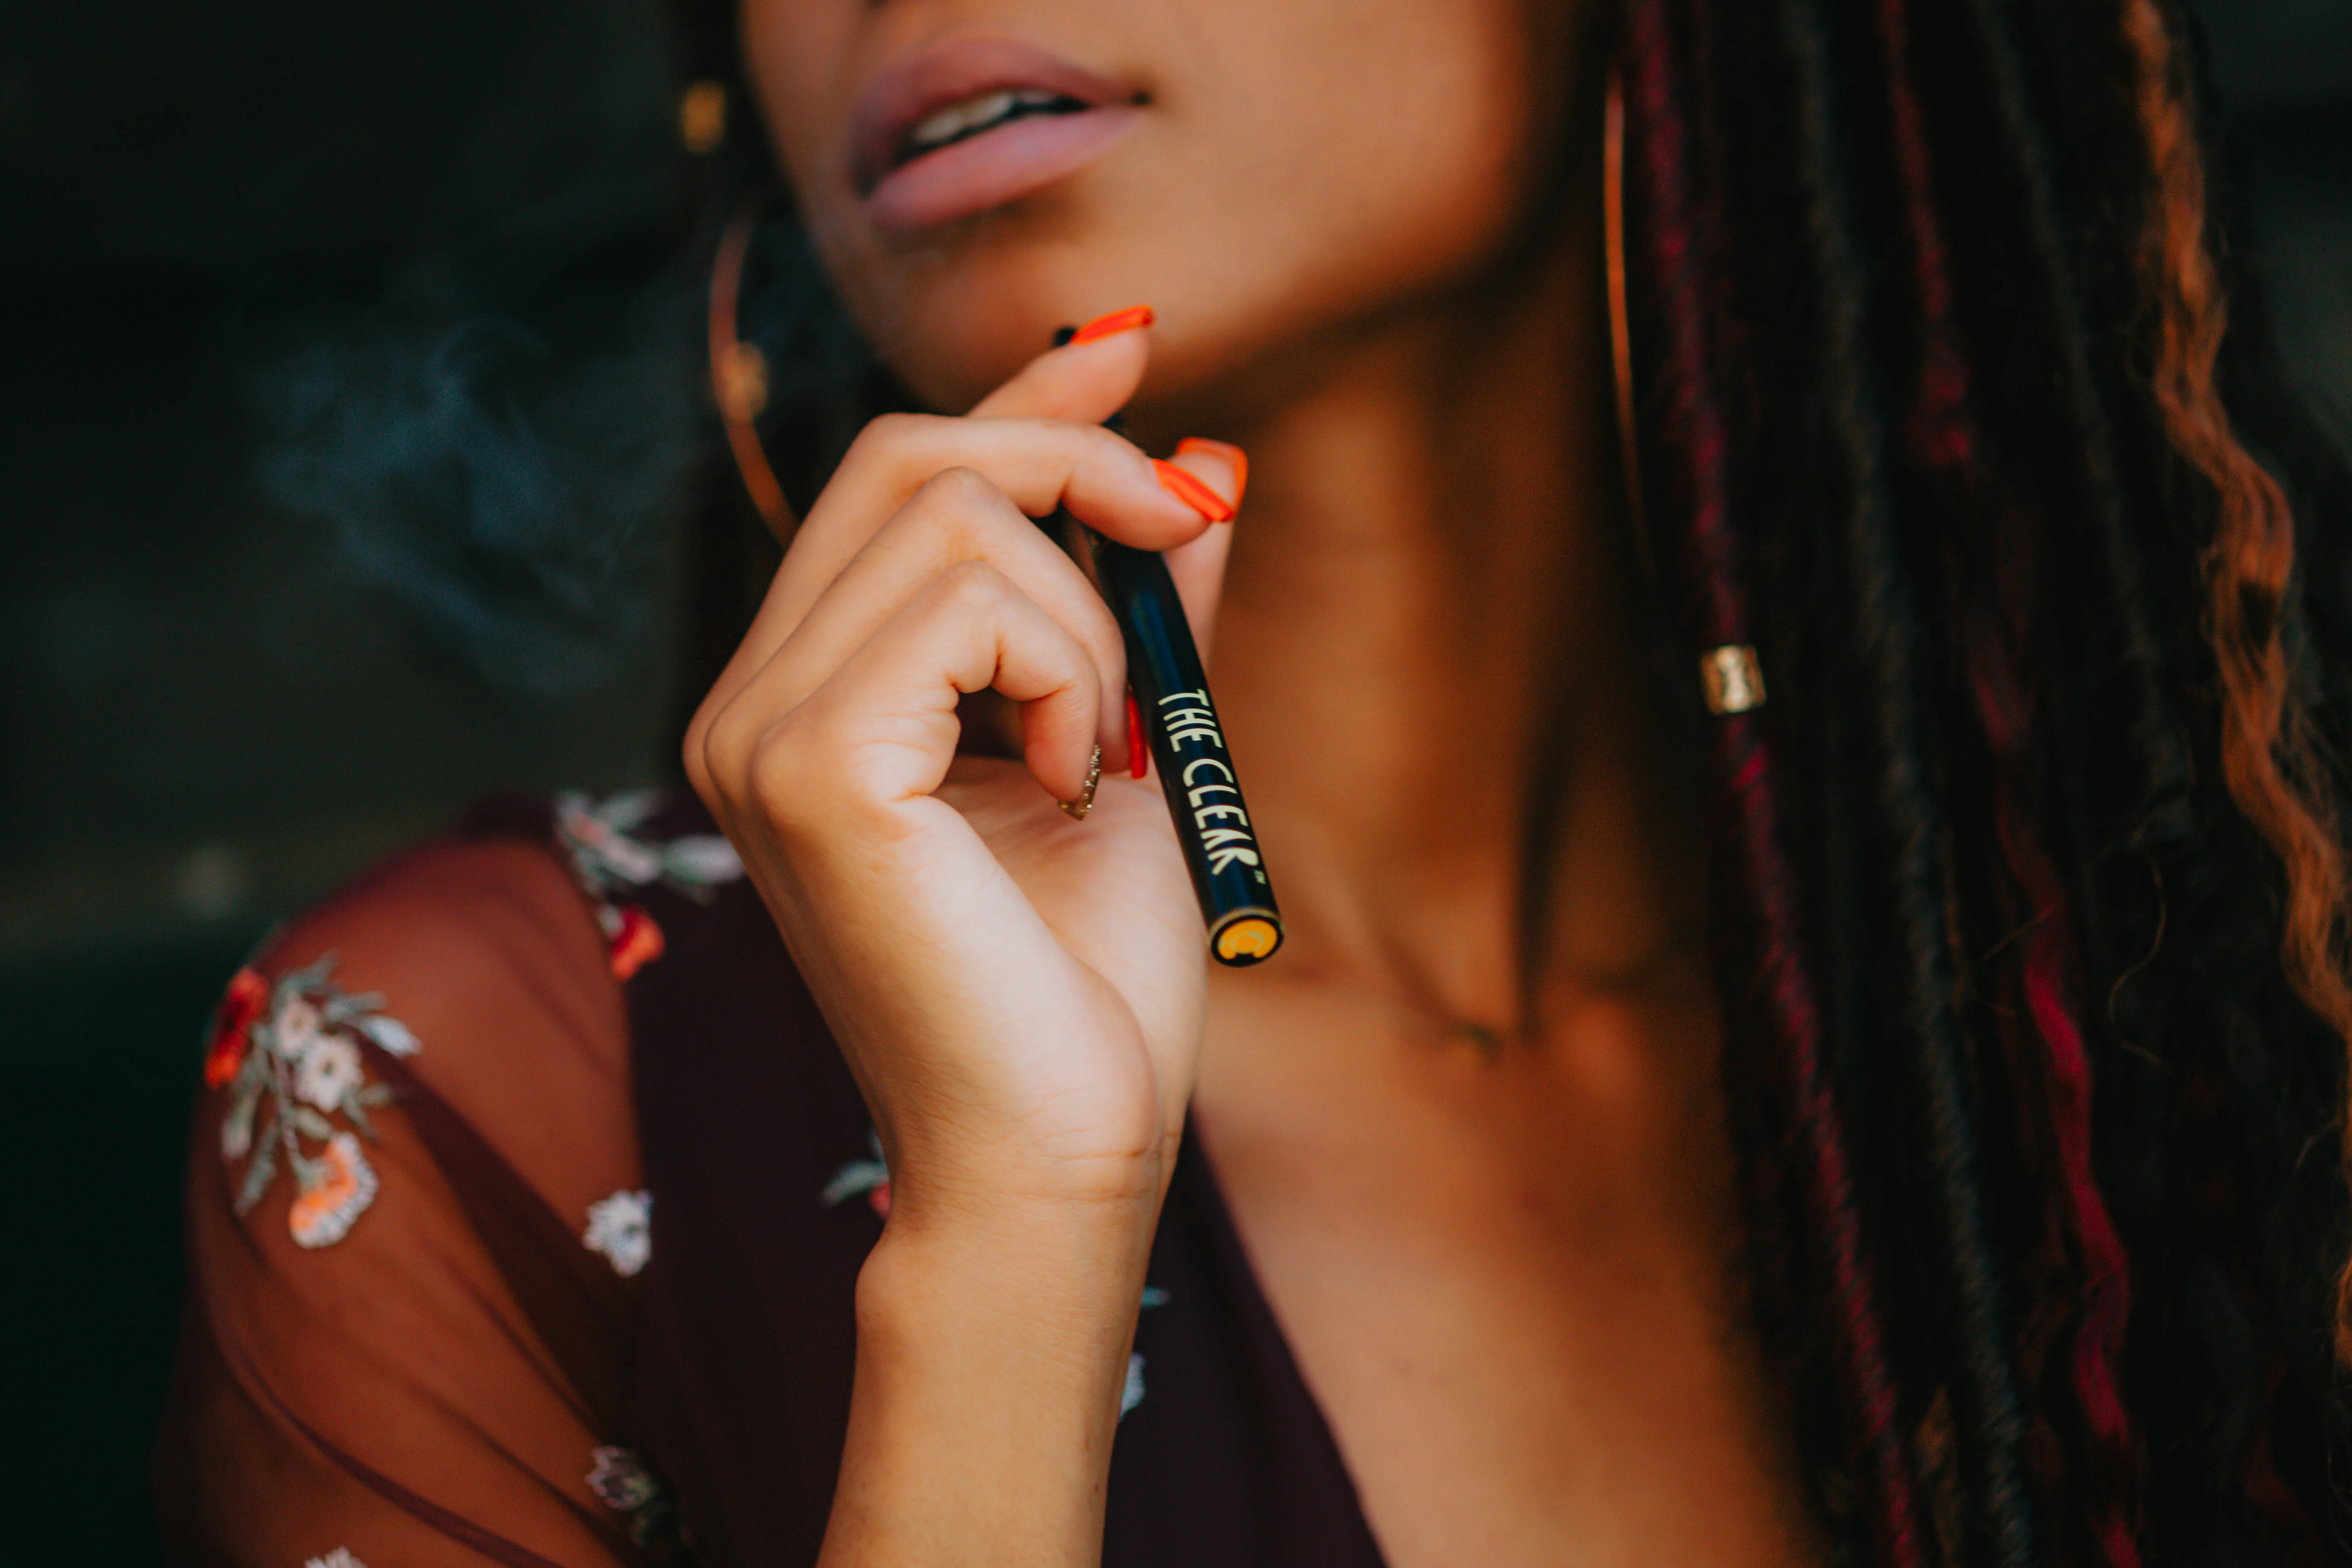 Close up of woman with manicured hand holding the clear vape pen. The clear makes vape pens for every kind of cannabis consumer over 21 in Colorado.